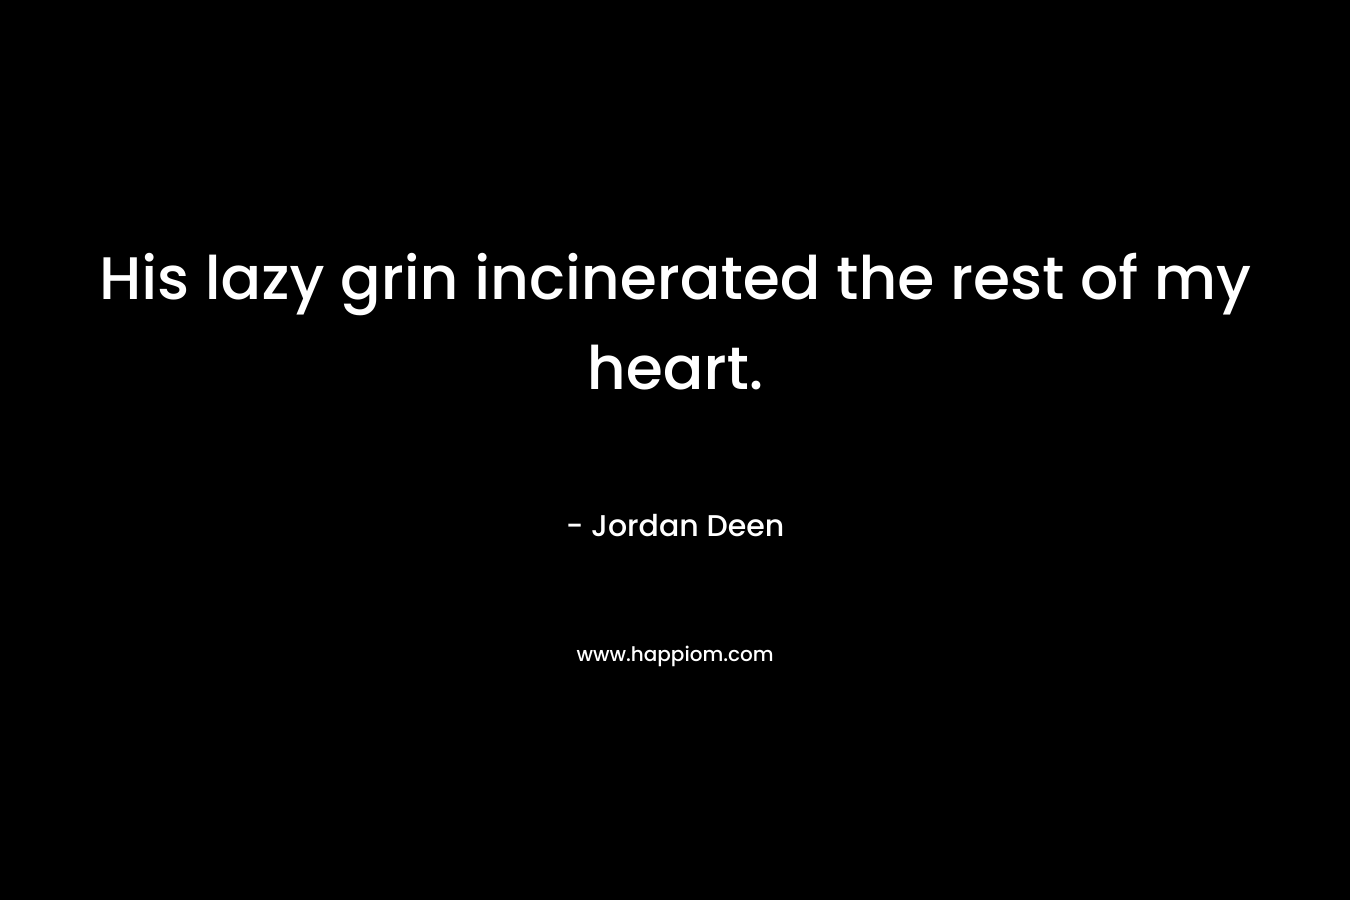 His lazy grin incinerated the rest of my heart. – Jordan Deen